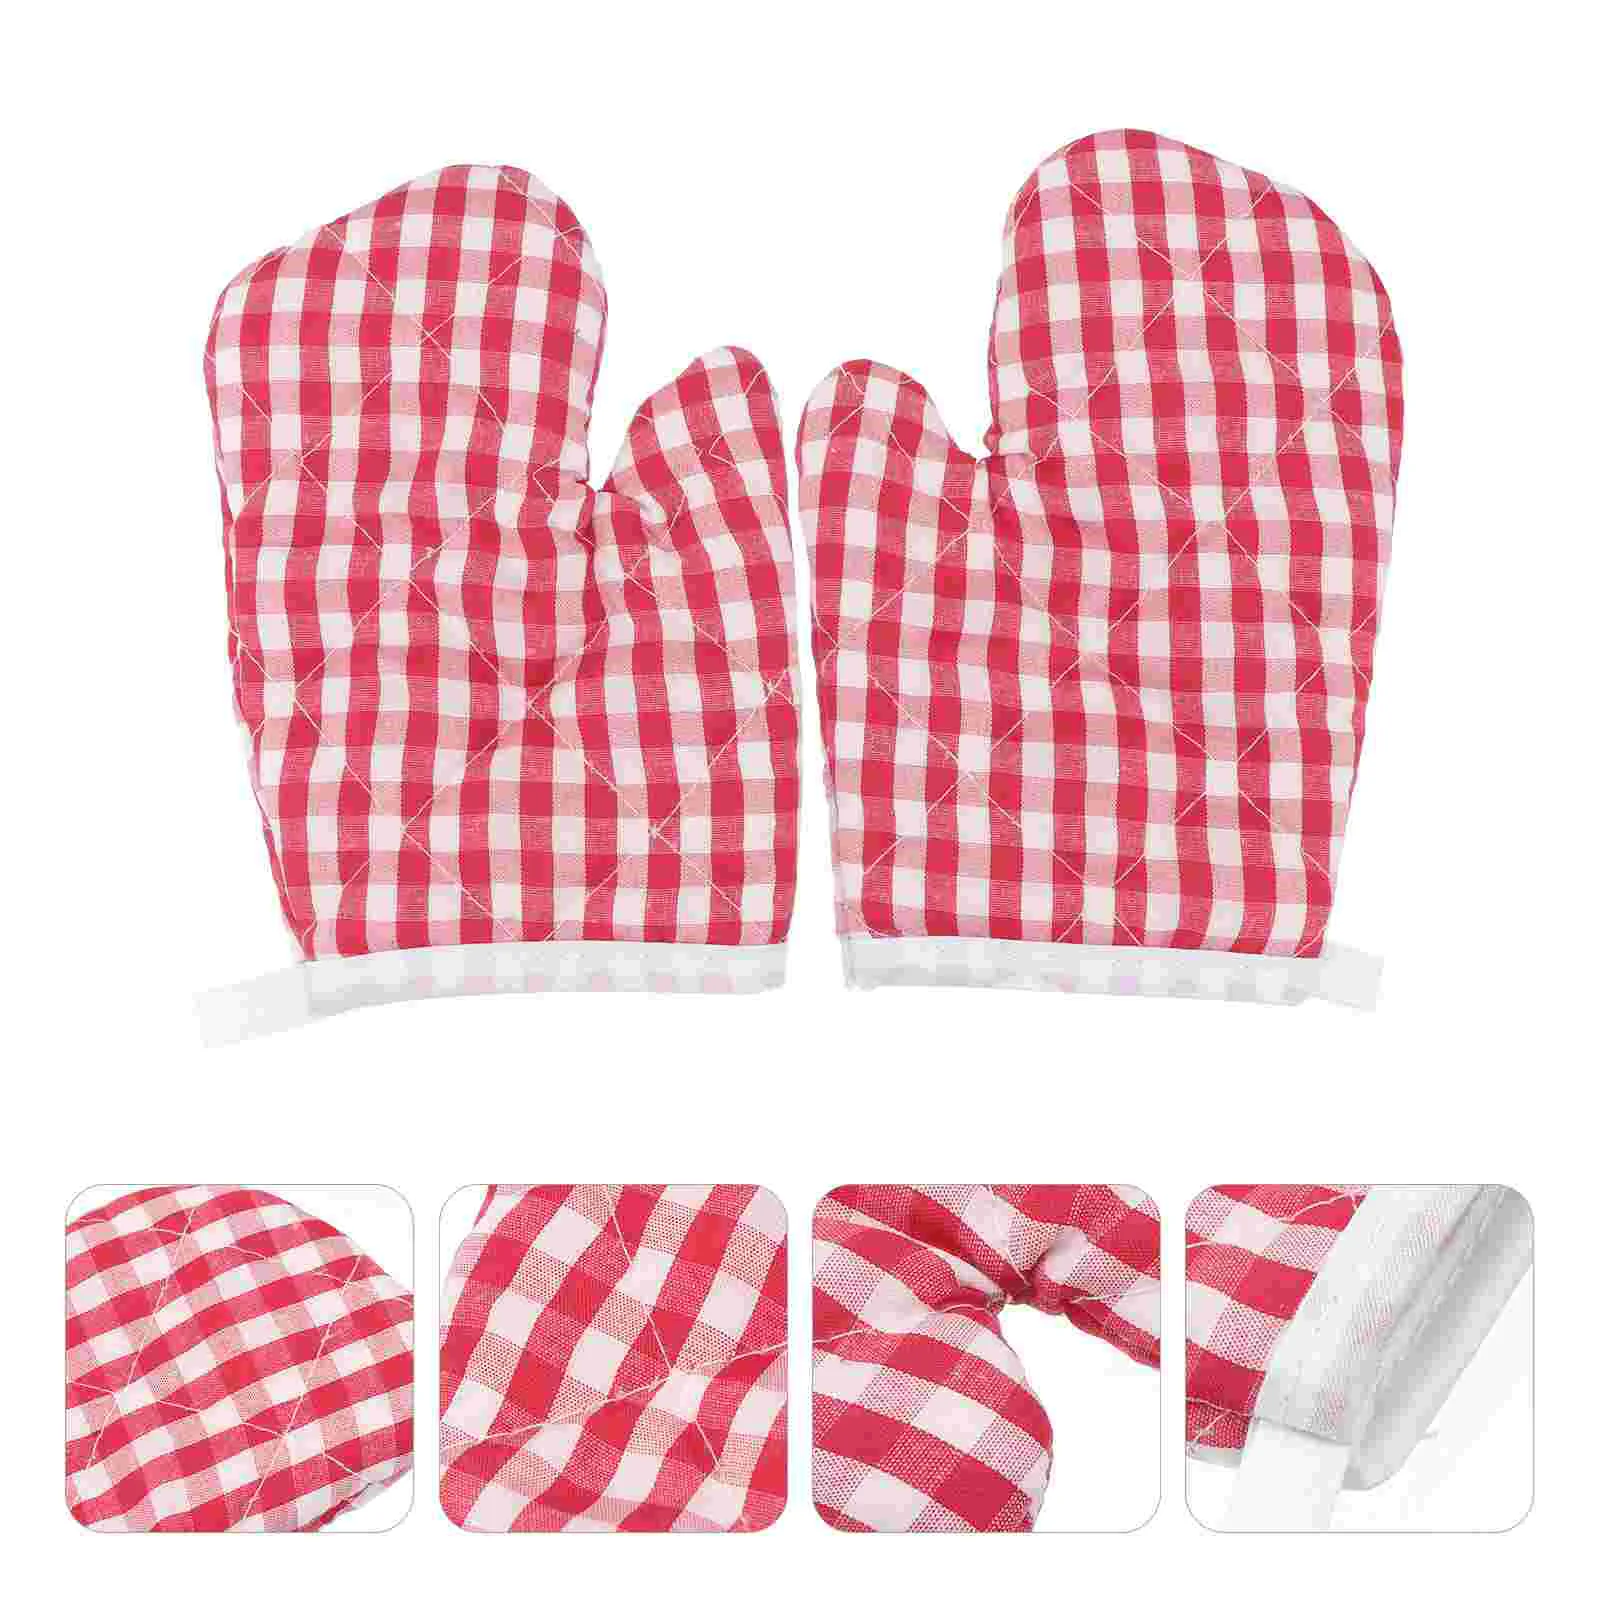 

2pcs Kids Oven Mitt Non Oven Microwave Oven Mitts Heat Resistant Cooking Mittens for Kitchen Cooking Children